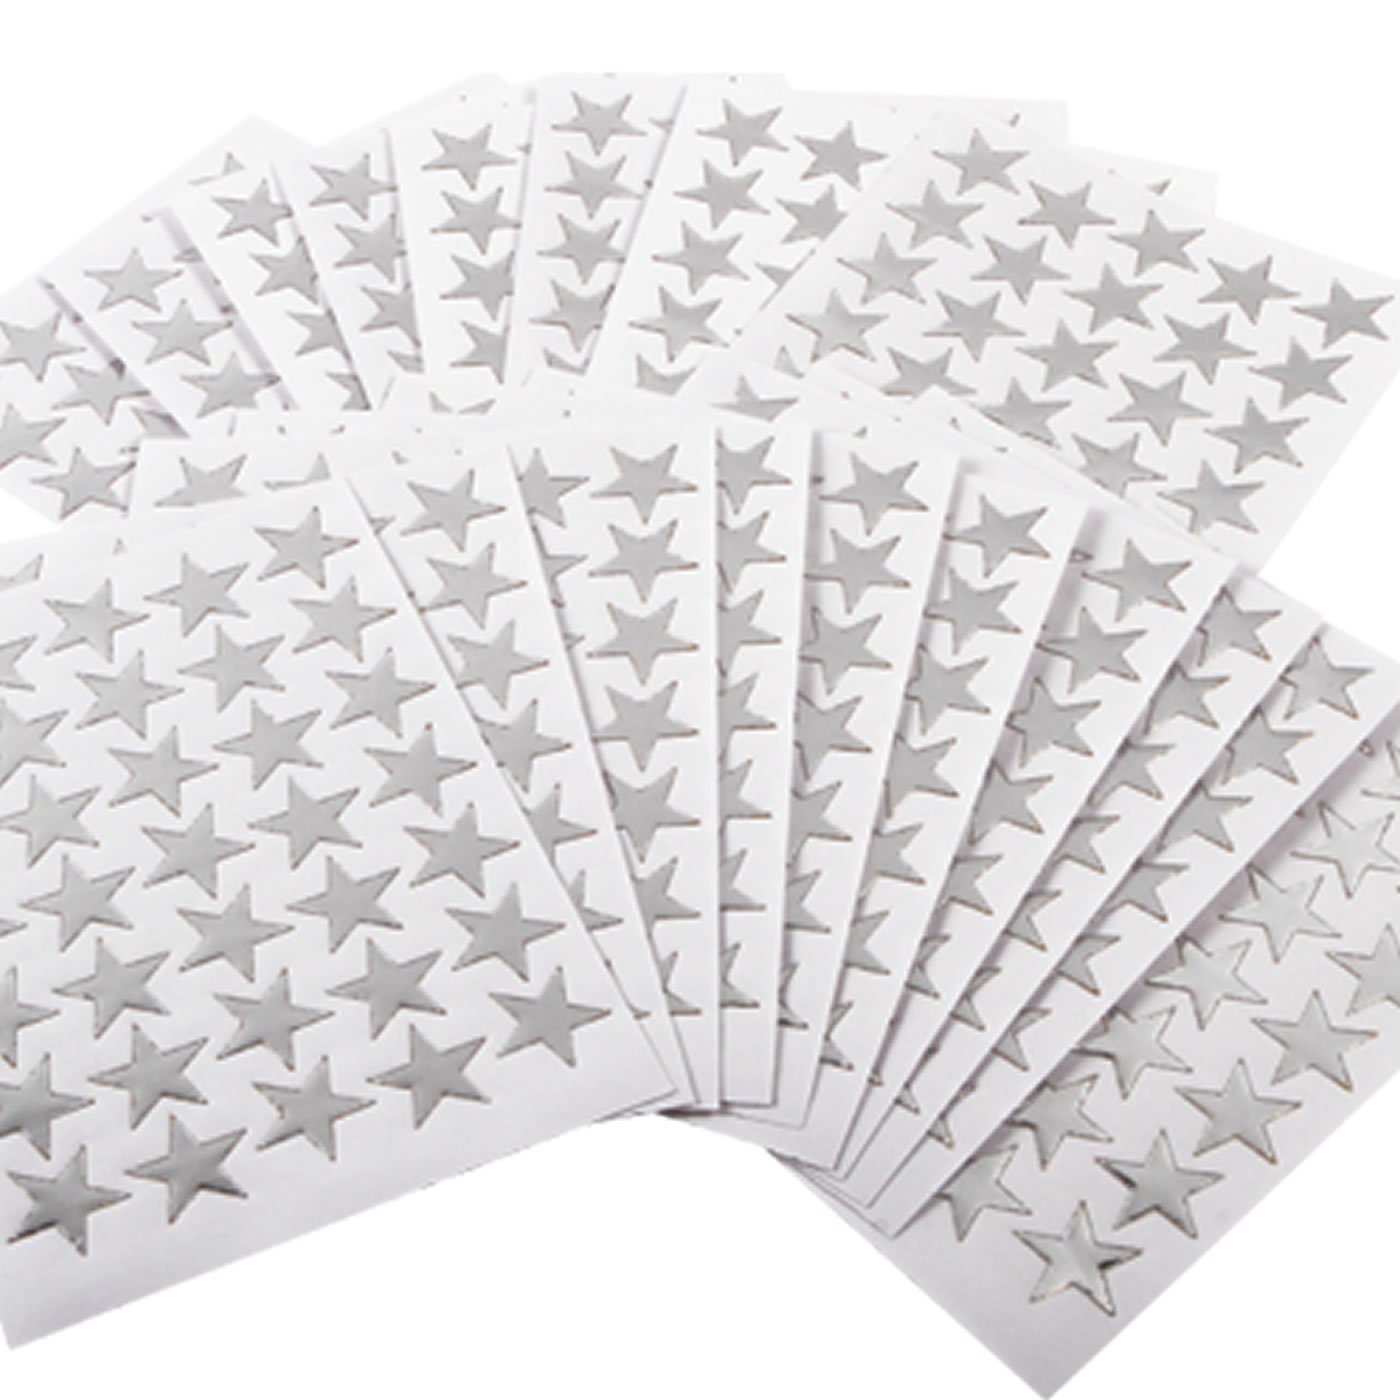 Silver Star Stickers for Kids Encouragement Well Done Encouraging Merit  Stars Pack of 700 